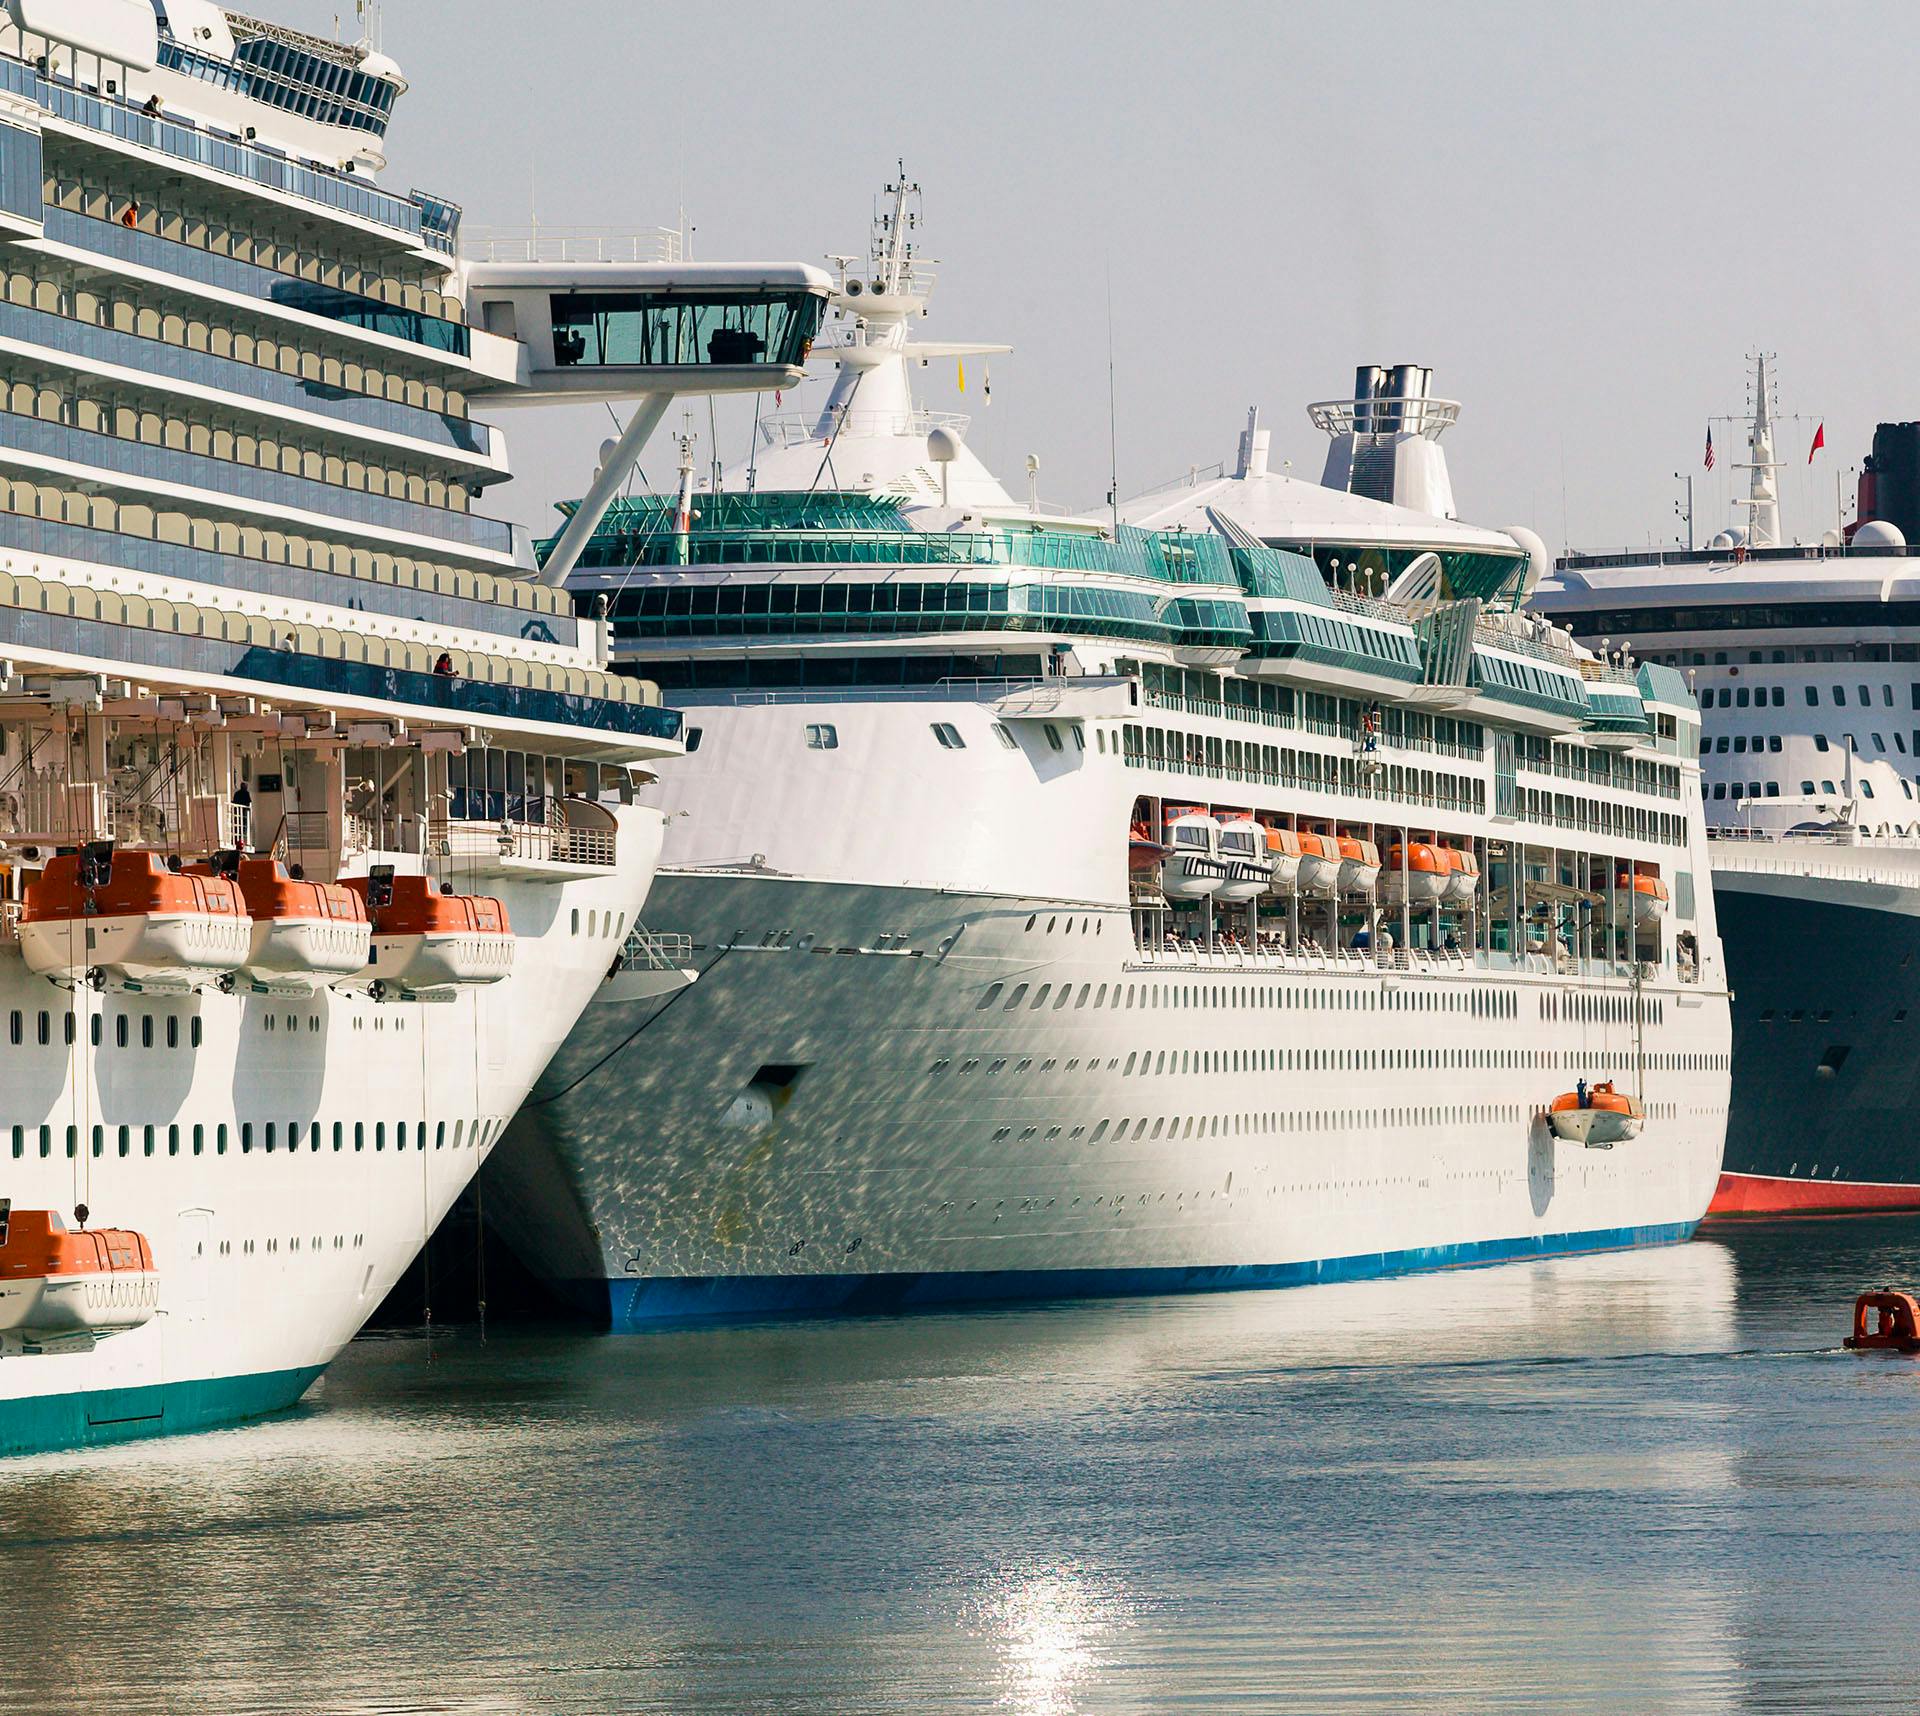 Cruise ships parked